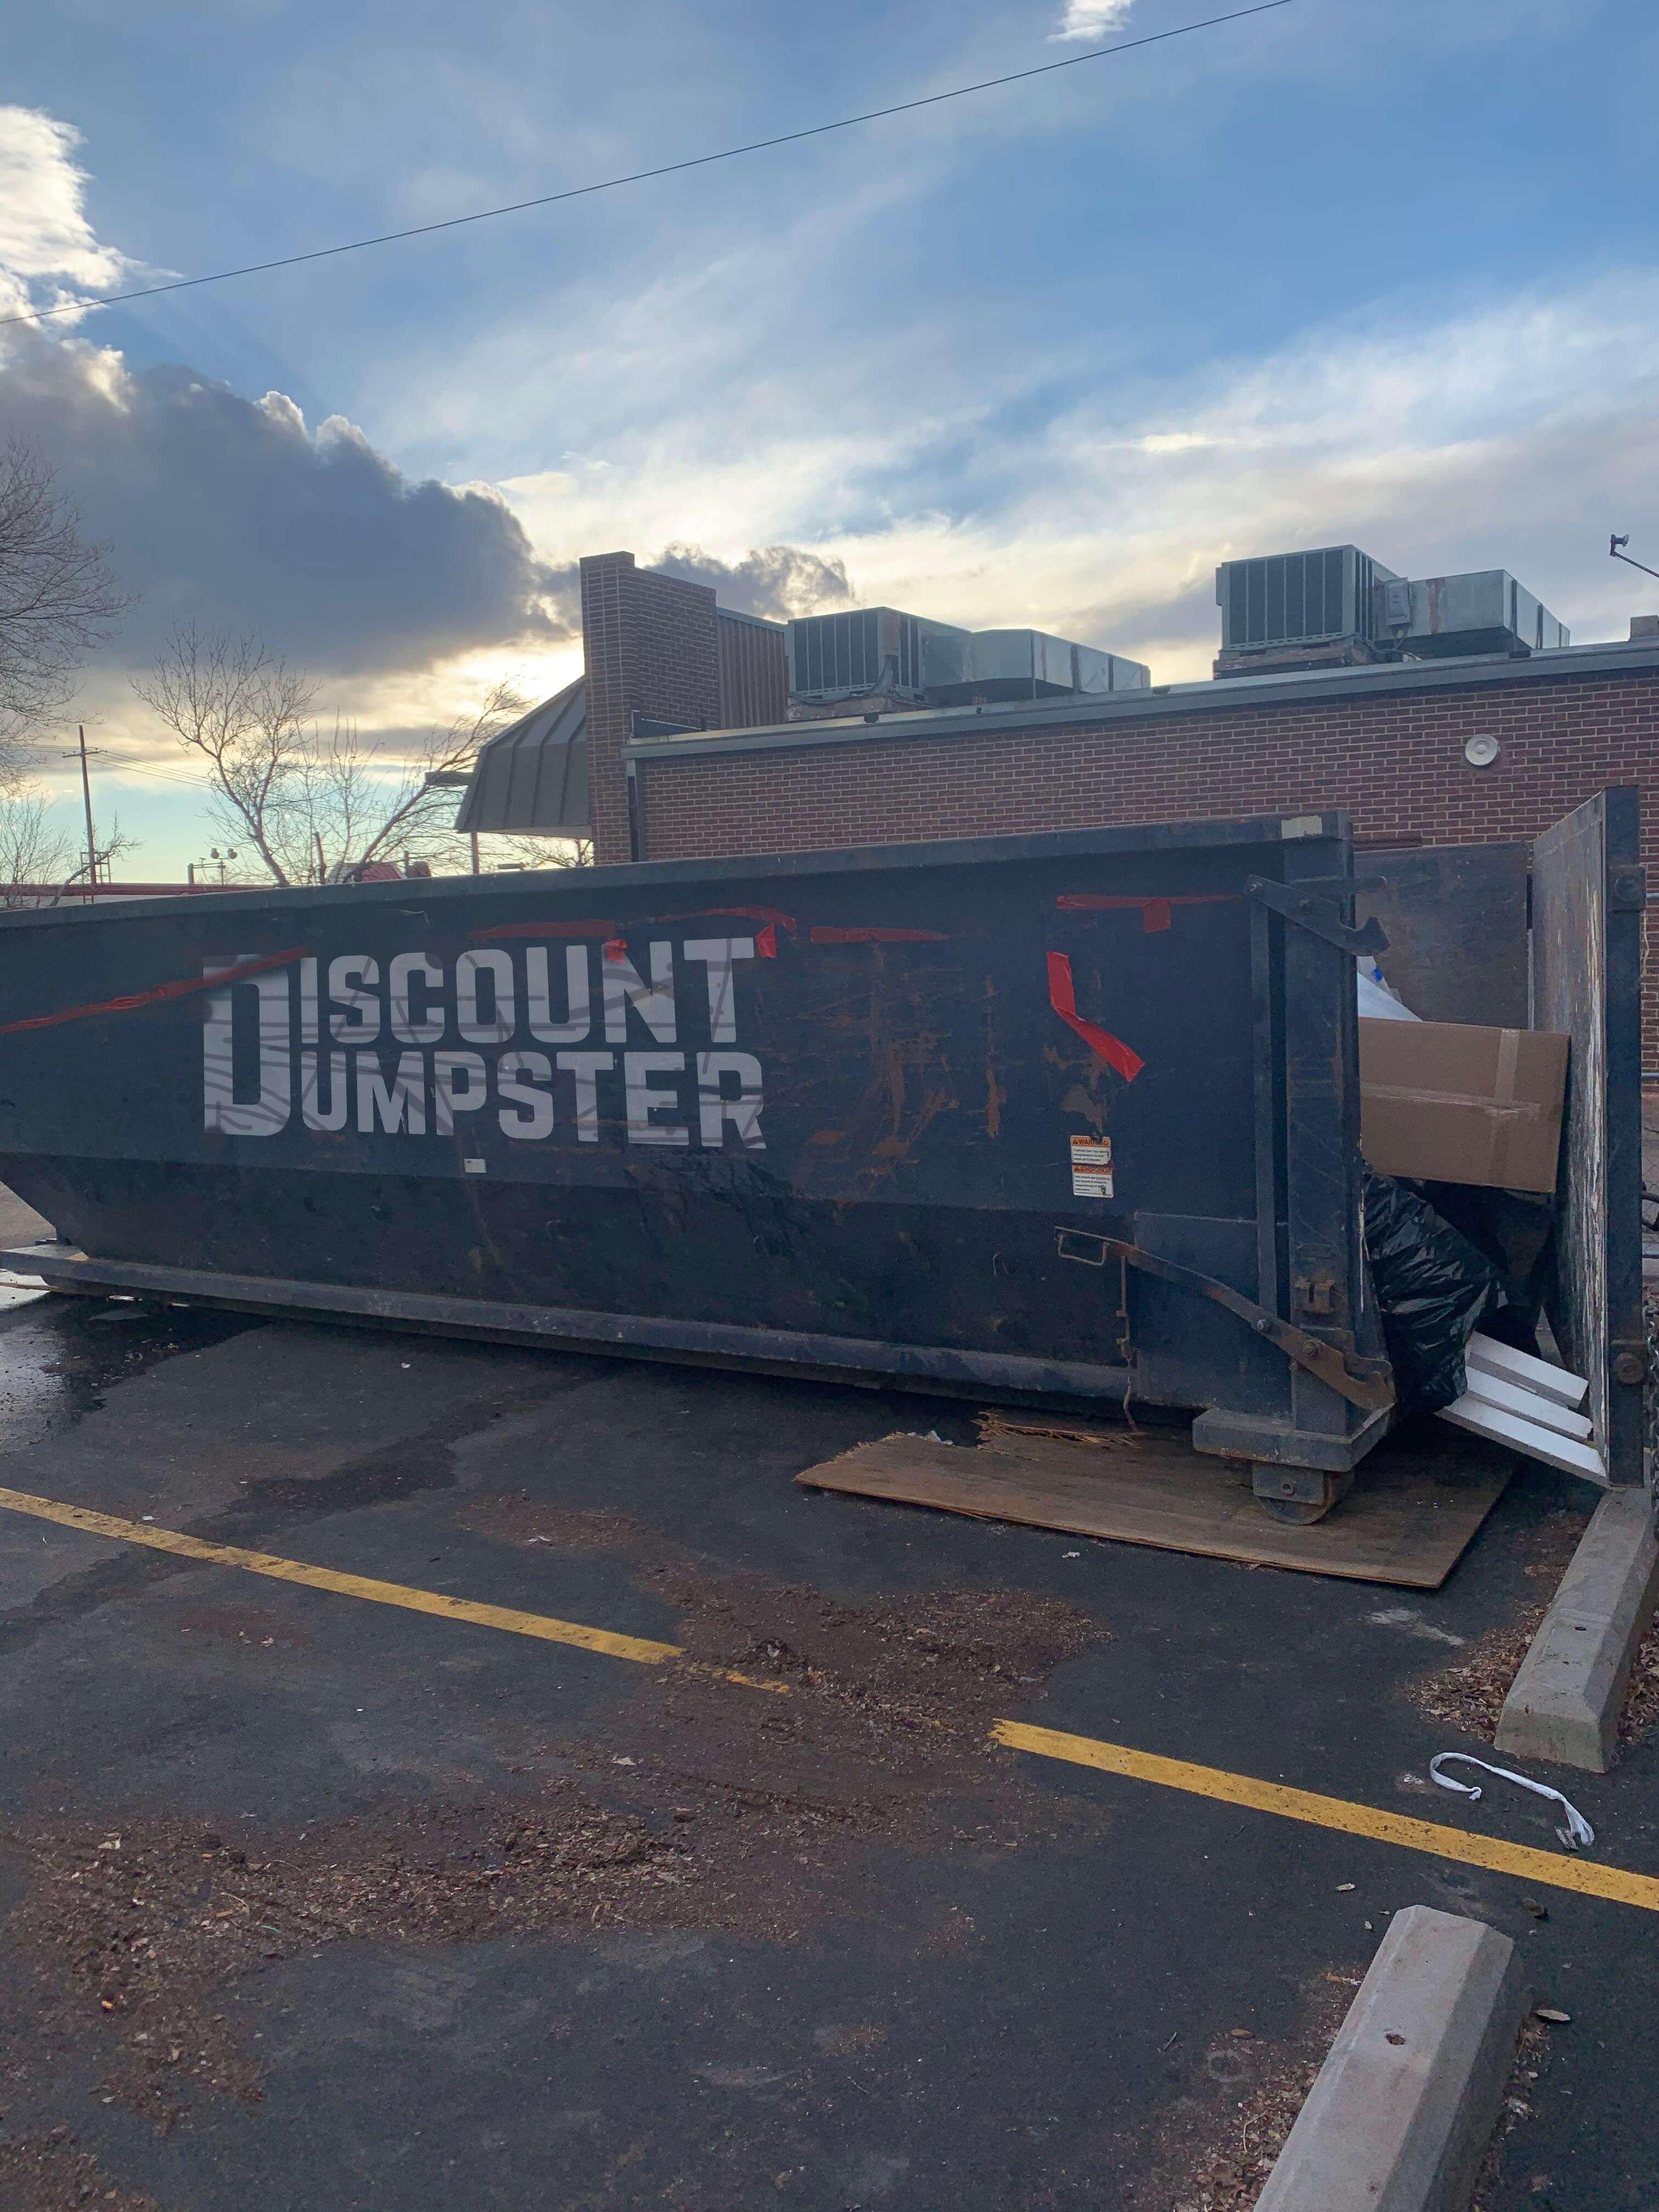 Discount dumpster has roll off dumpsters for your commercial needs in Denver co